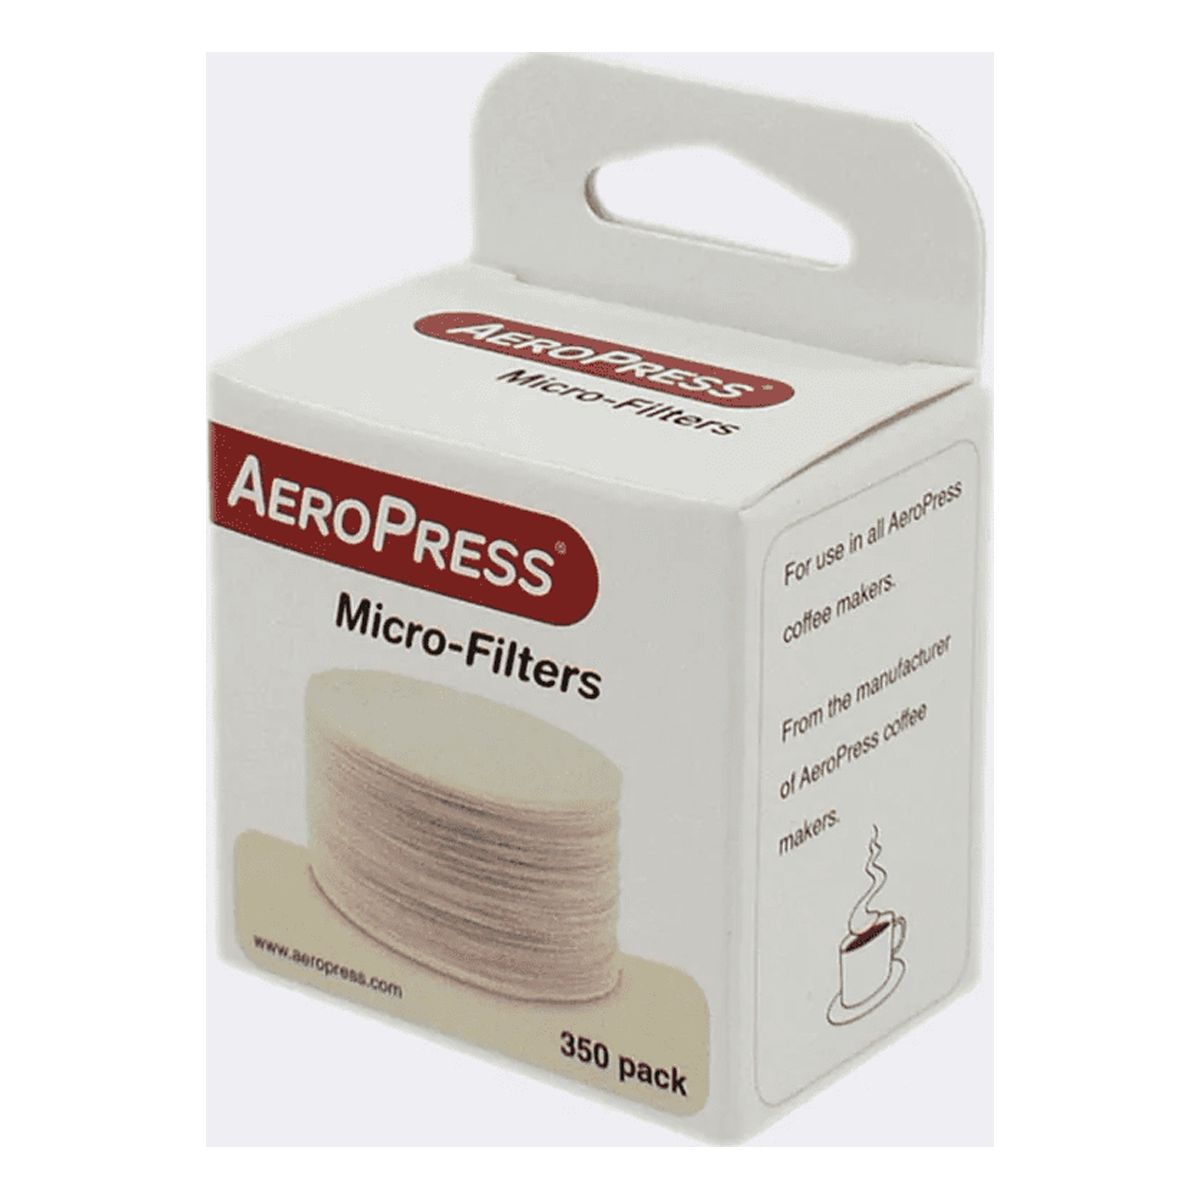 AeroPress Coffee Maker Replacement Micro-Filters, 350 Count - image 2 of 4